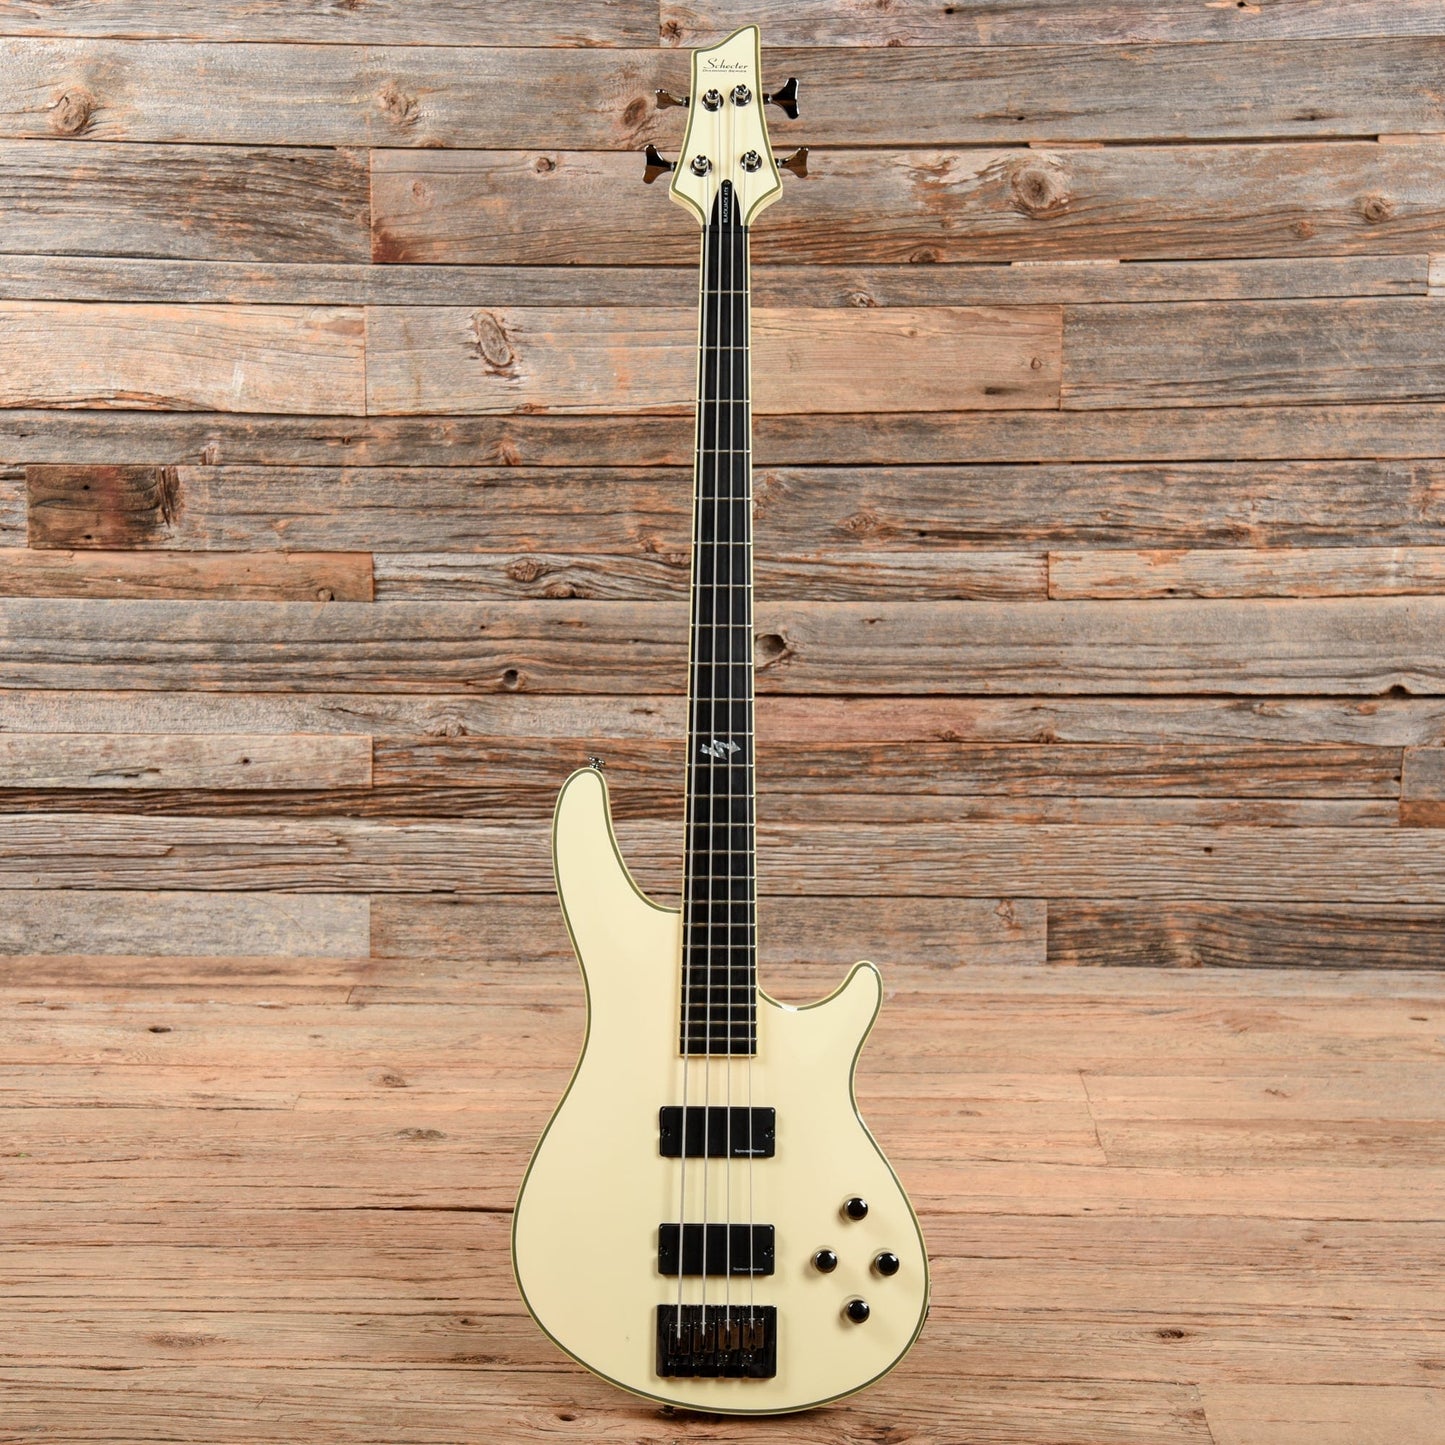 Schecter Blackjack ATX C-4 Aged White 2012 Bass Guitars / 5-String or More